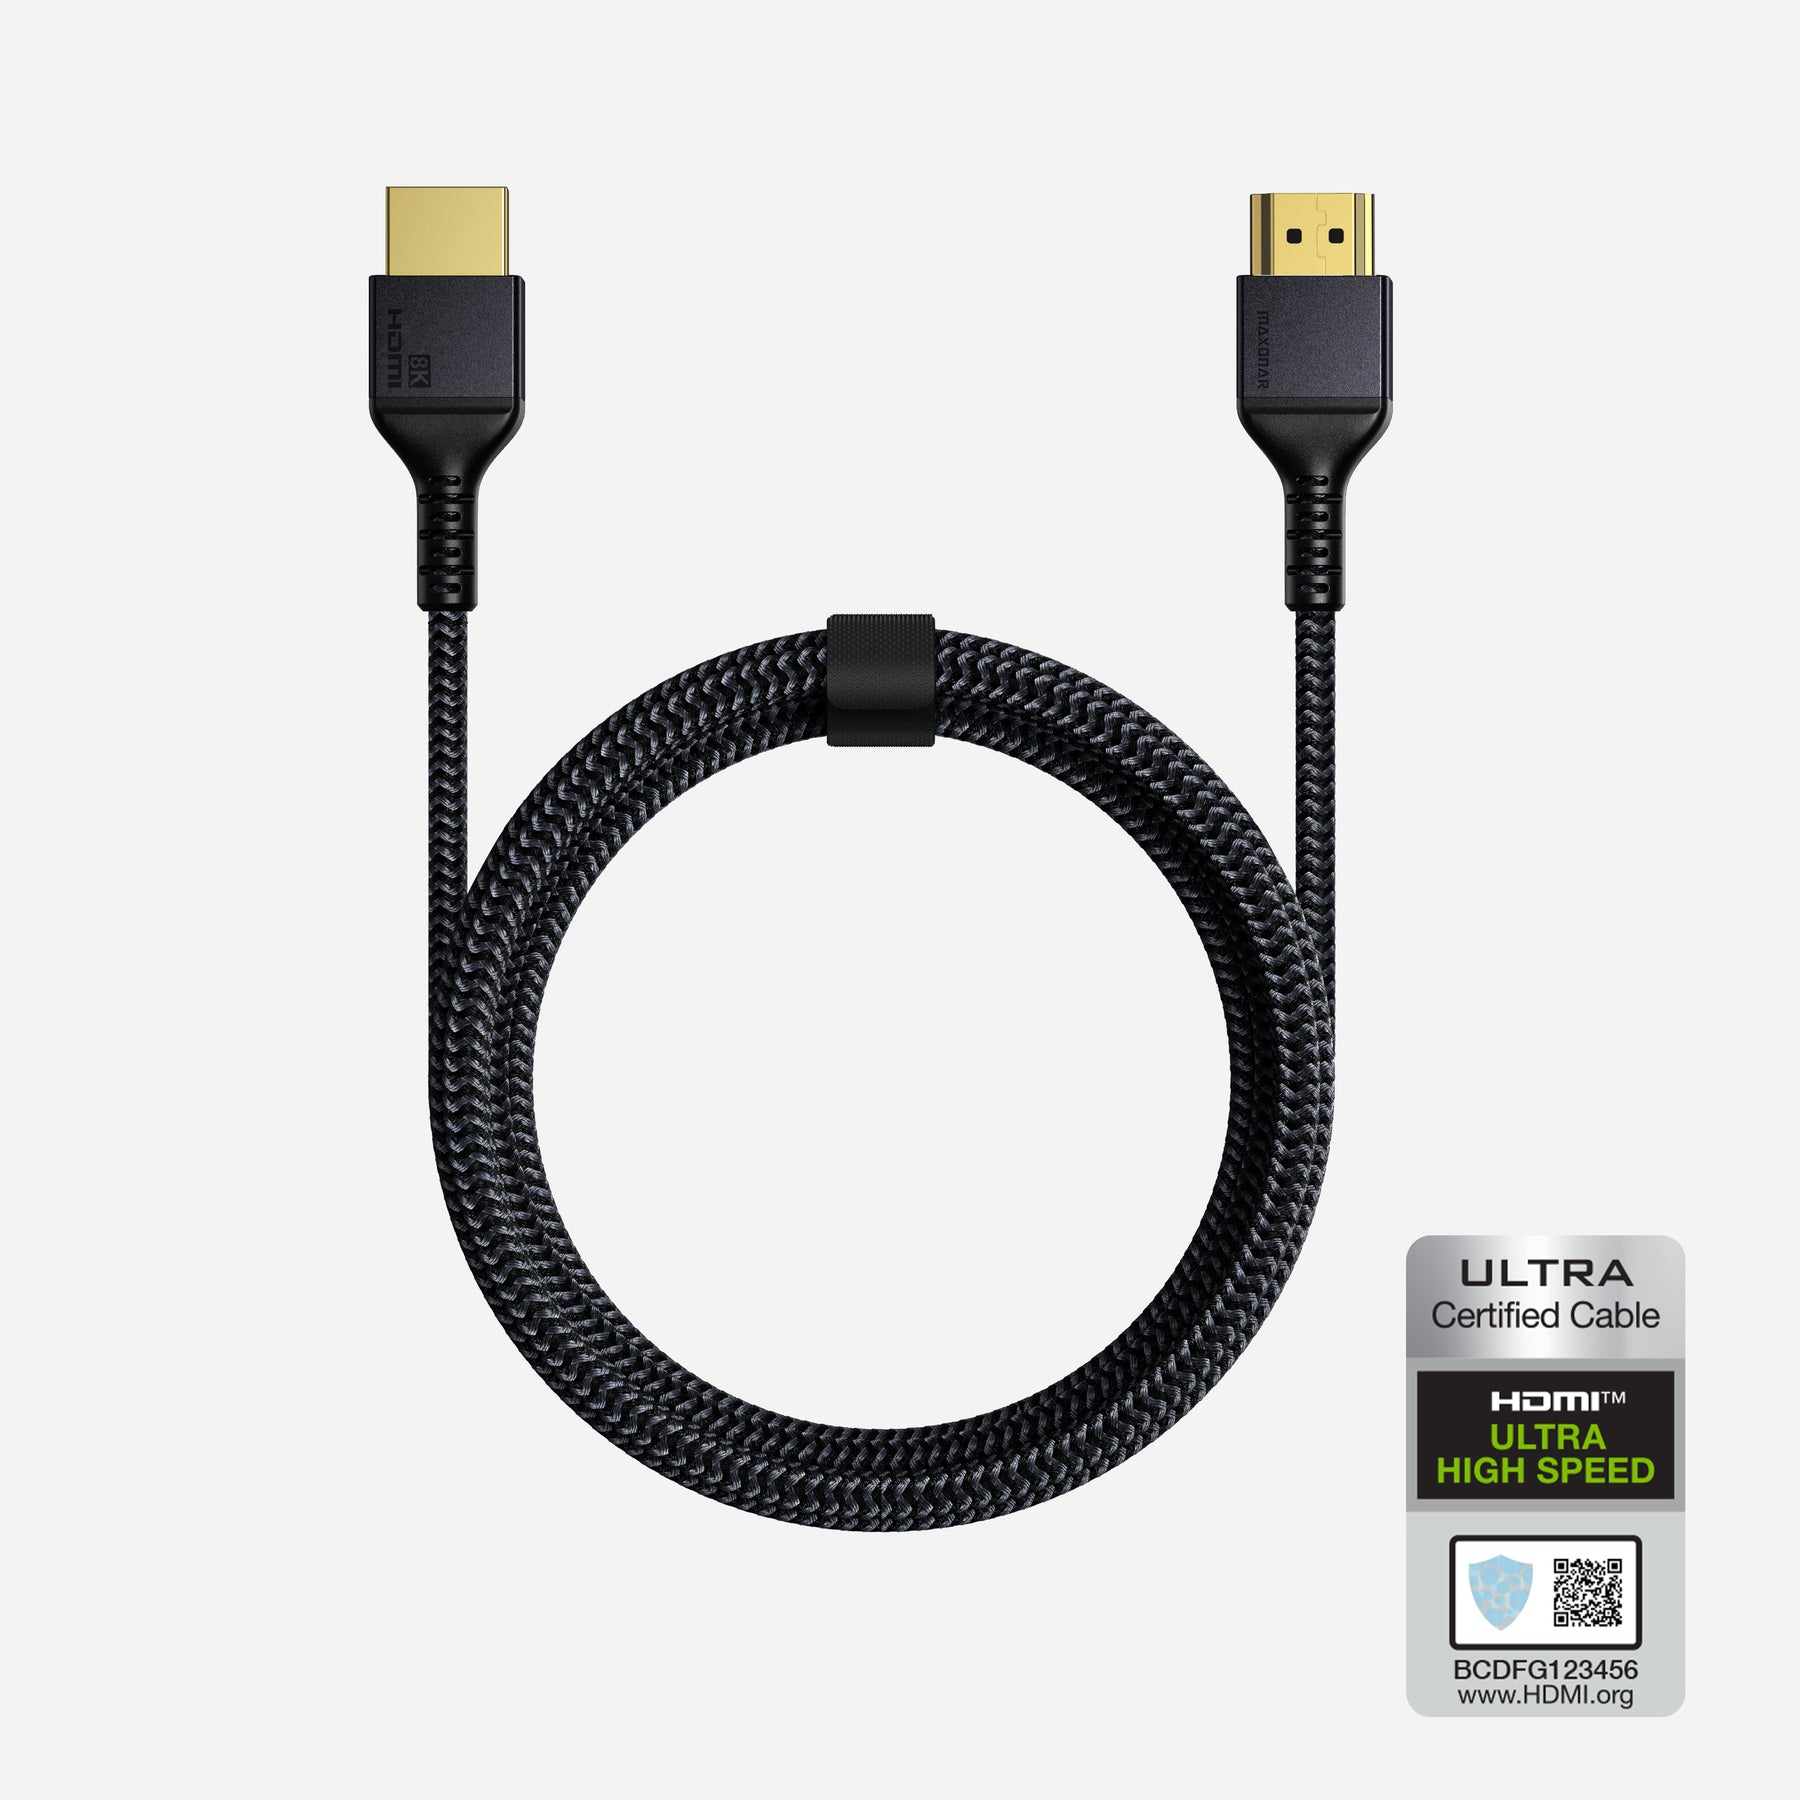 Maxonar 8K HDMI Cables 10FT, [Certified] Ultra High Speed HDMI 2.1 Cable,  8K60Hz 4K120Hz 144Hz, 48Gbps HDCP 2.2&2.3 eARC Dynamic HDR Dolby for PS5